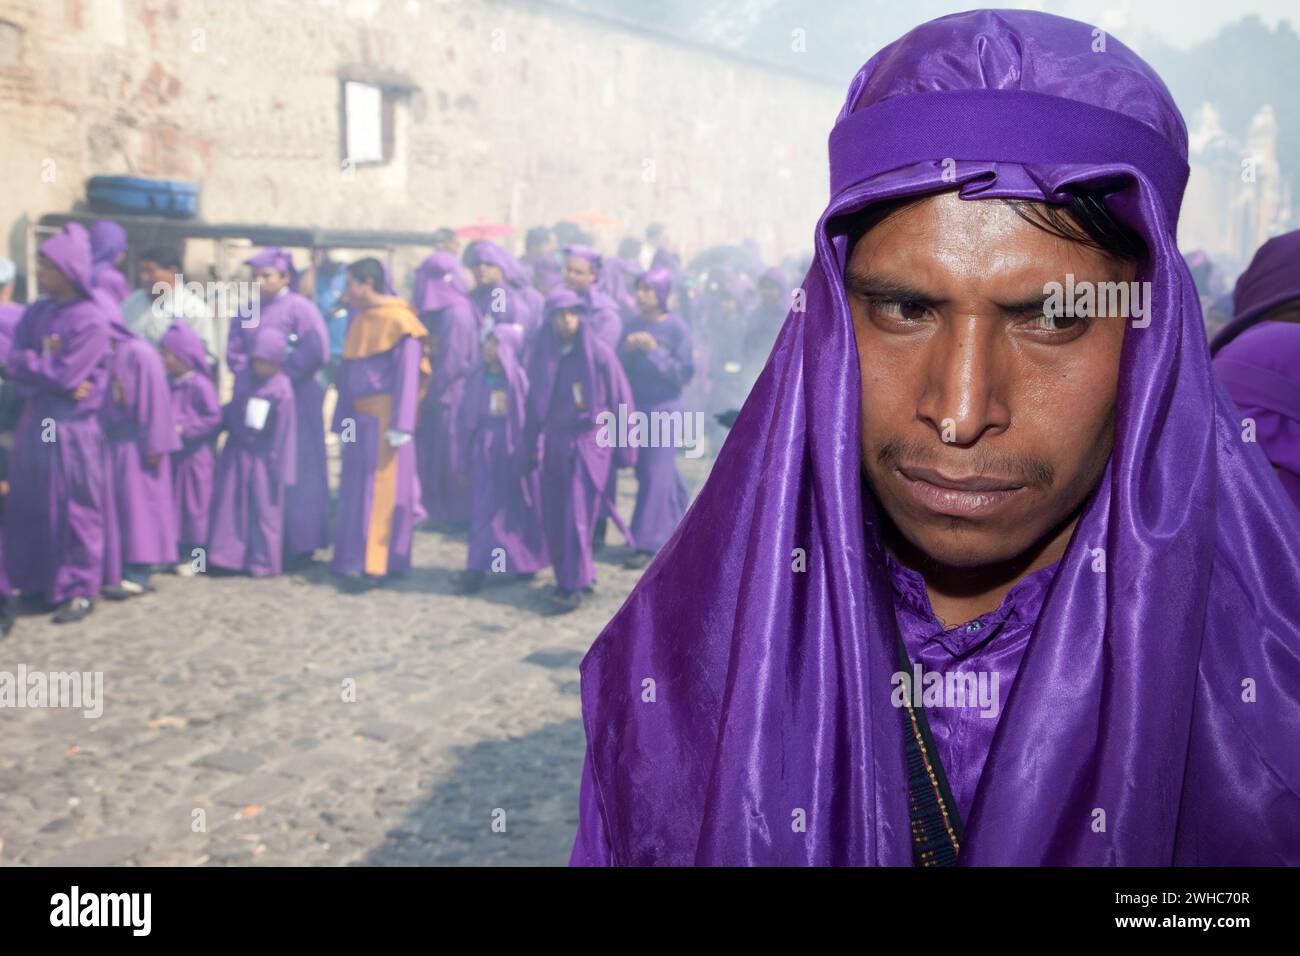 Antigua, Guatemala.   A Cucurucho Accompanying a Religious Procession during Holy Week, La Semana Santa.  Clouds of Incense in Background. Stock Photo